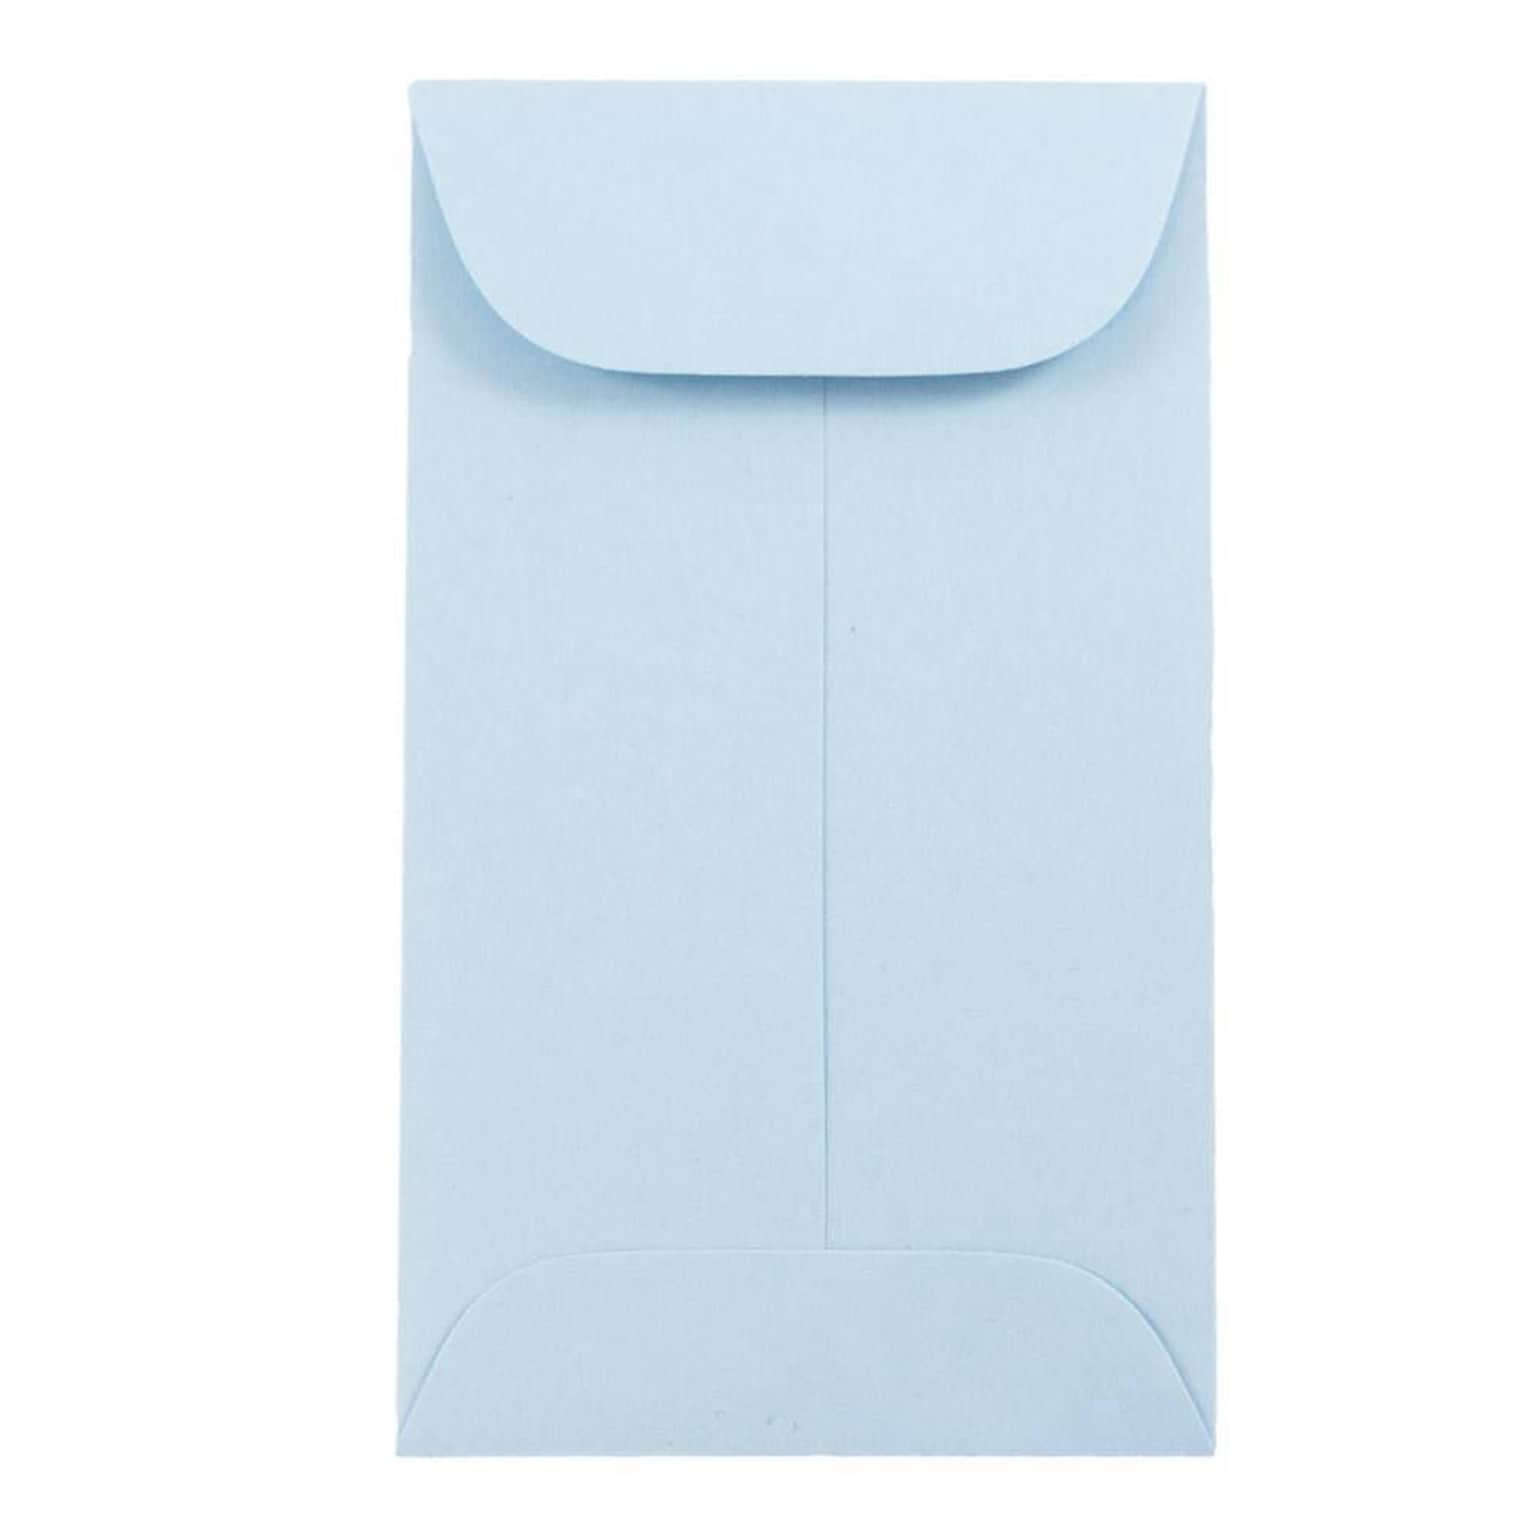 JAM Paper® #3 Coin Business Envelopes, 2.5 x 4.25, Baby Blue, 100/Pack (356730542B)